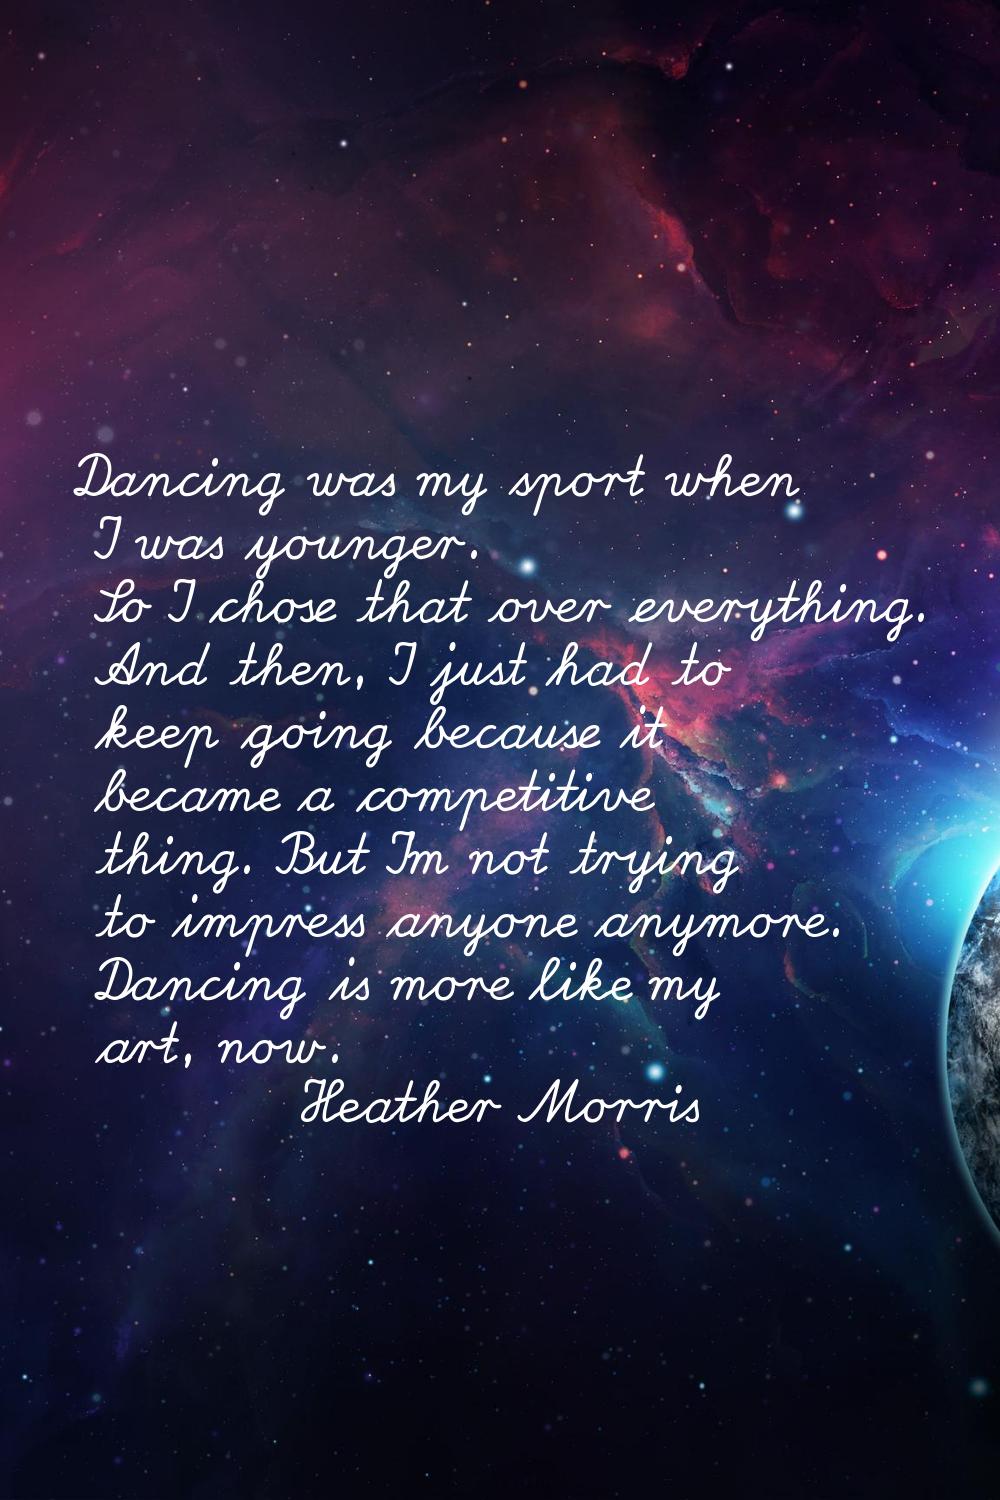 Dancing was my sport when I was younger. So I chose that over everything. And then, I just had to k